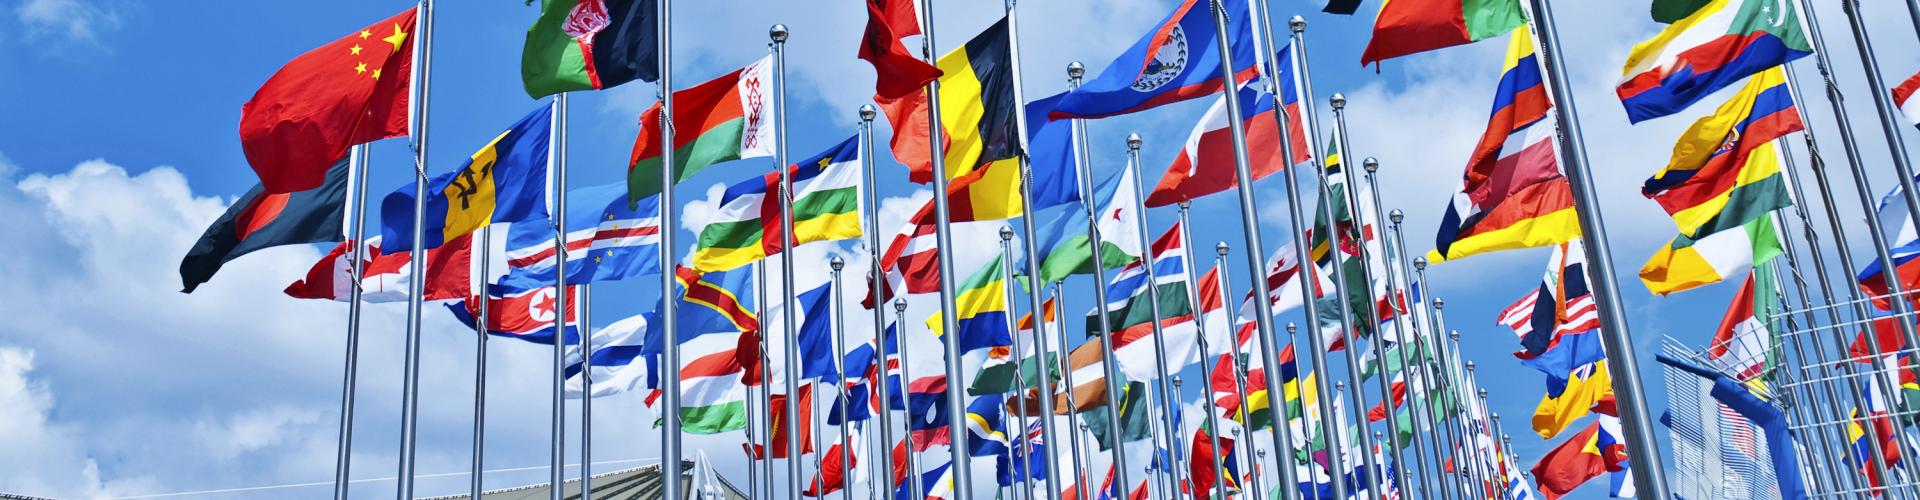 Collective display of international flags on flagpoles.